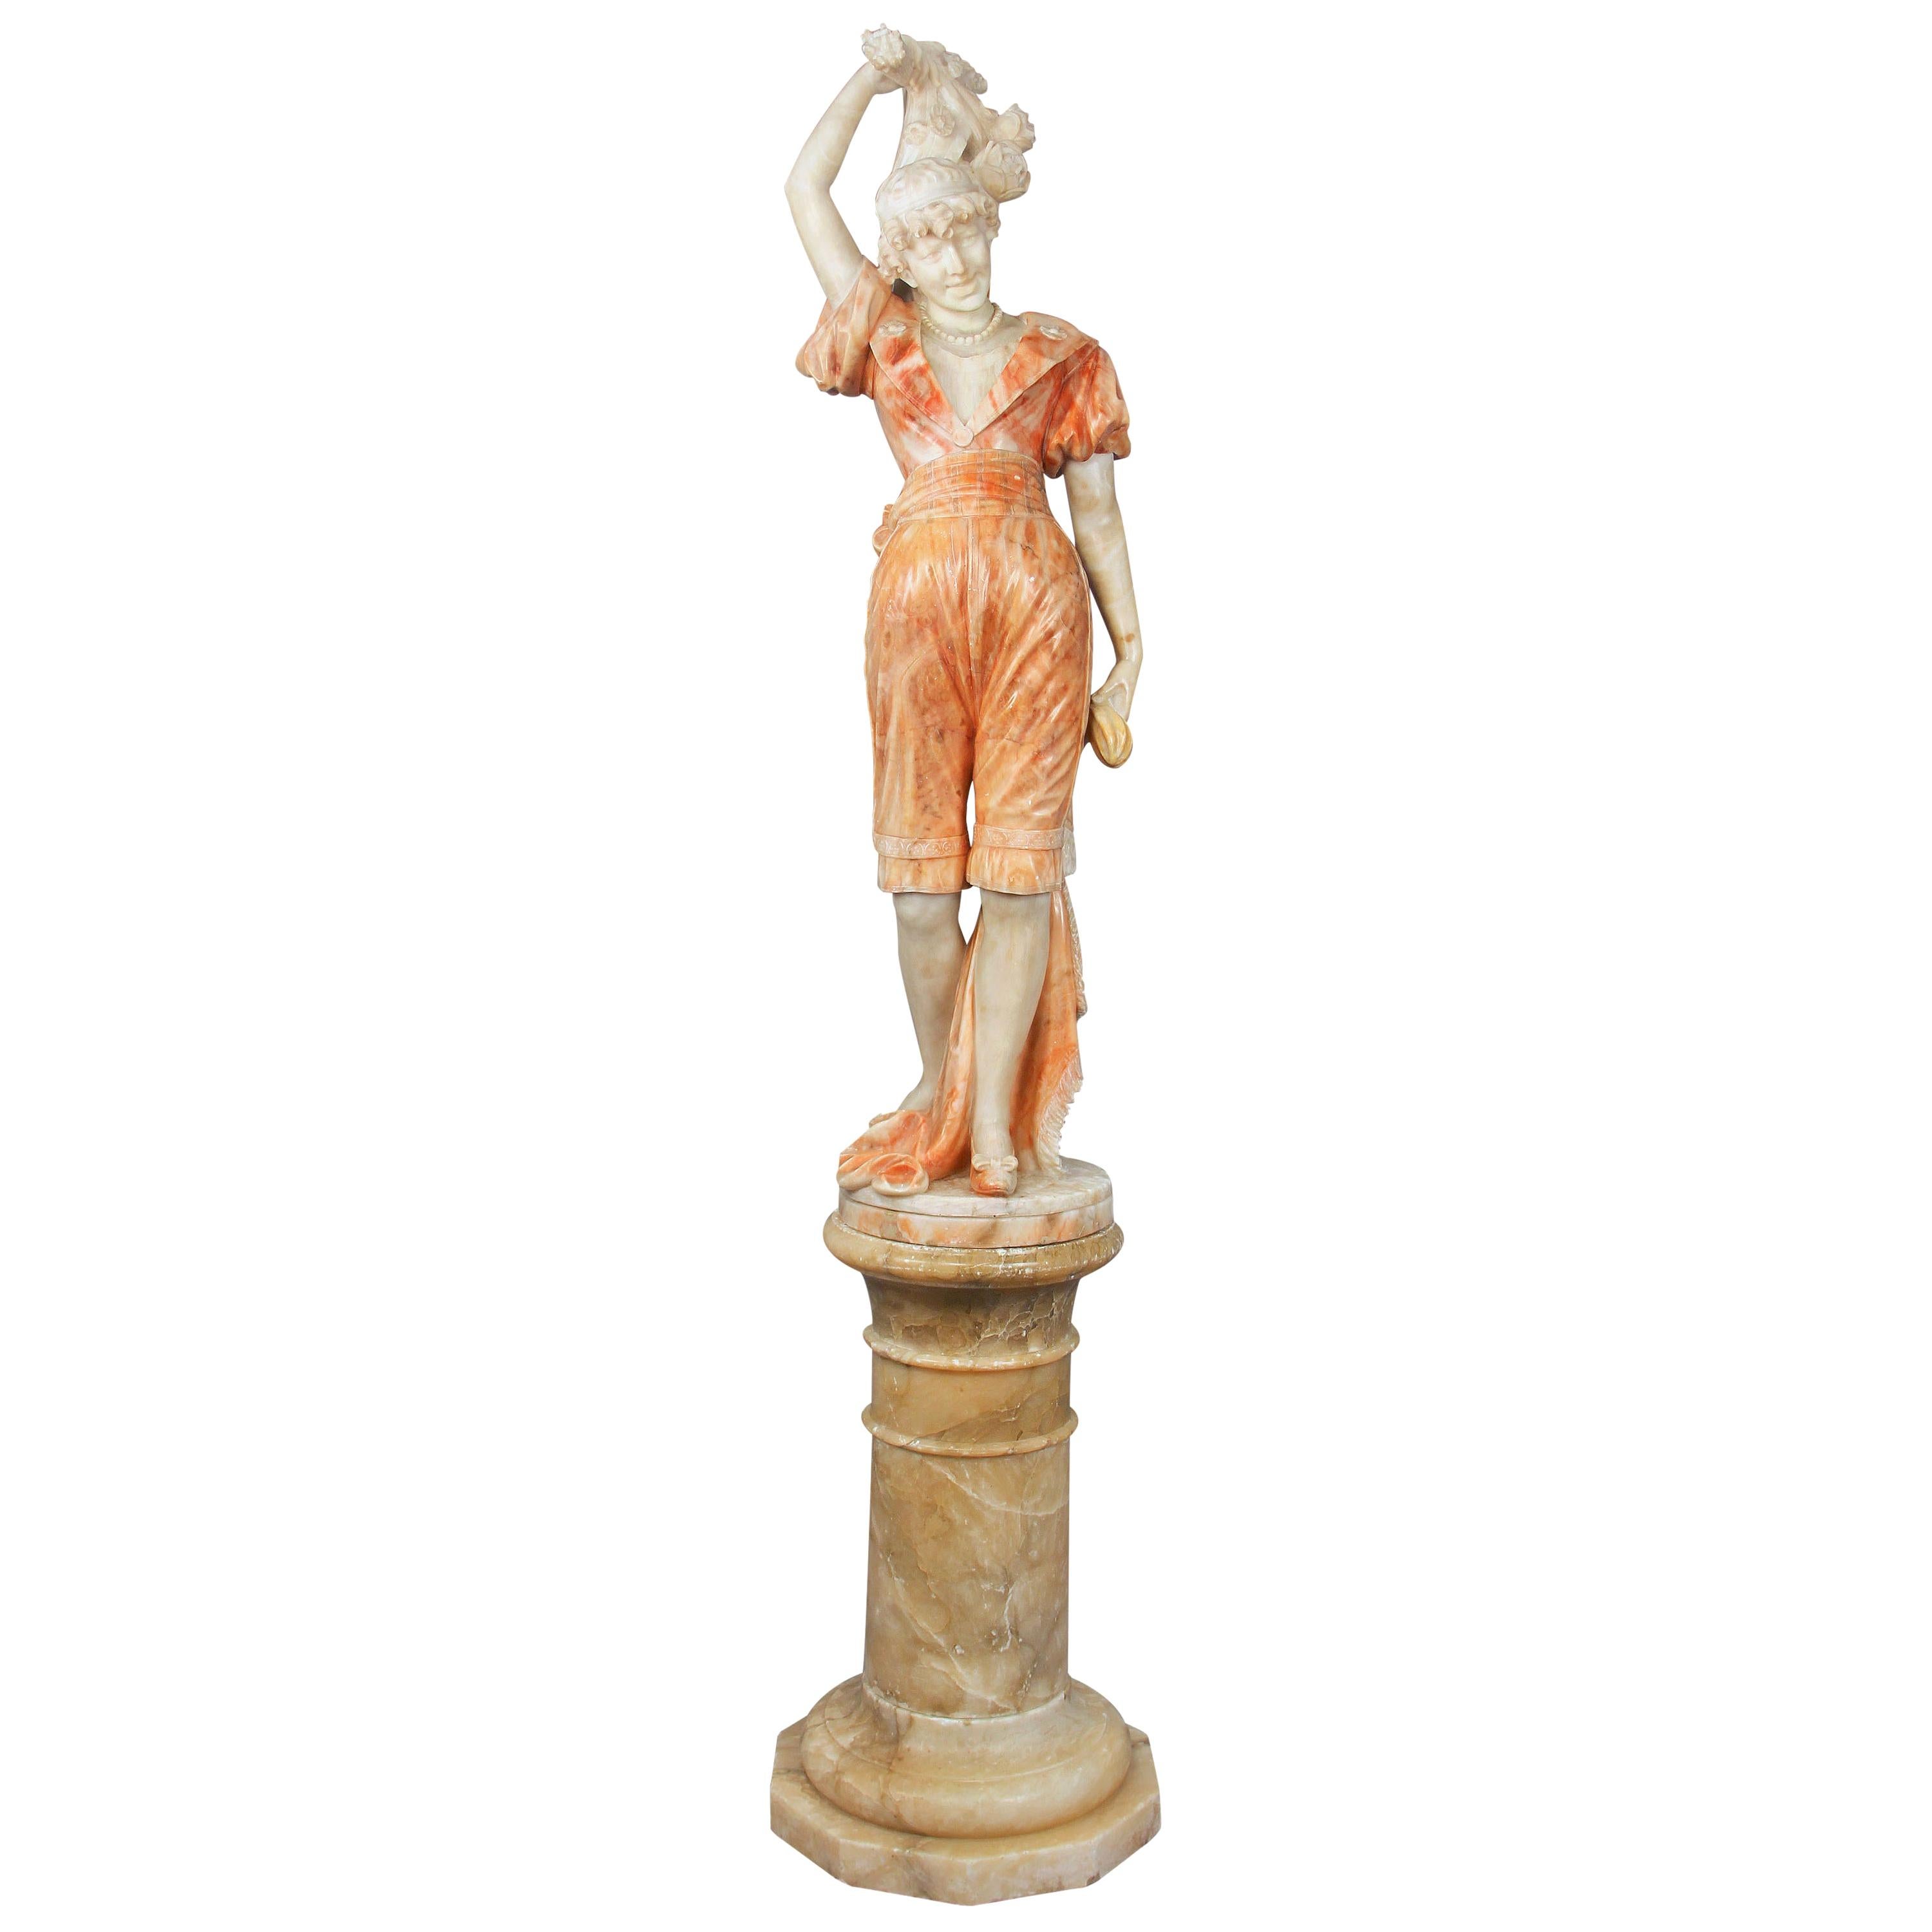 Late 19th to Early 20th Century Carved Italian Alabaster Figure of a Woman